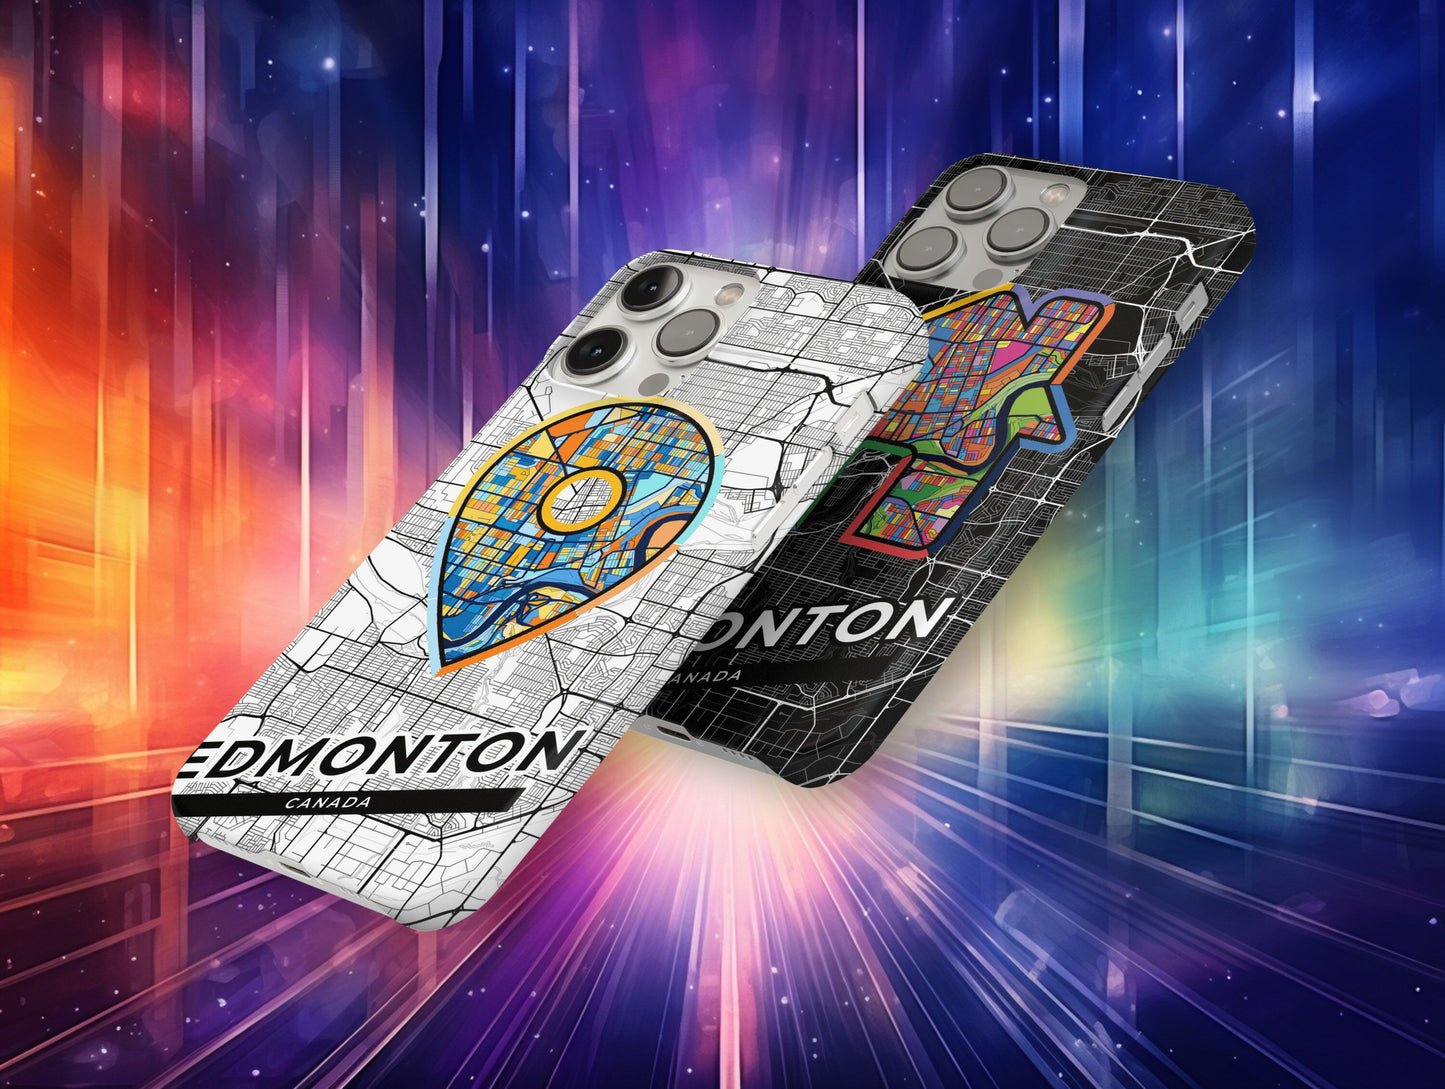 Edmonton Canada slim phone case with colorful icon. Birthday, wedding or housewarming gift. Couple match cases.